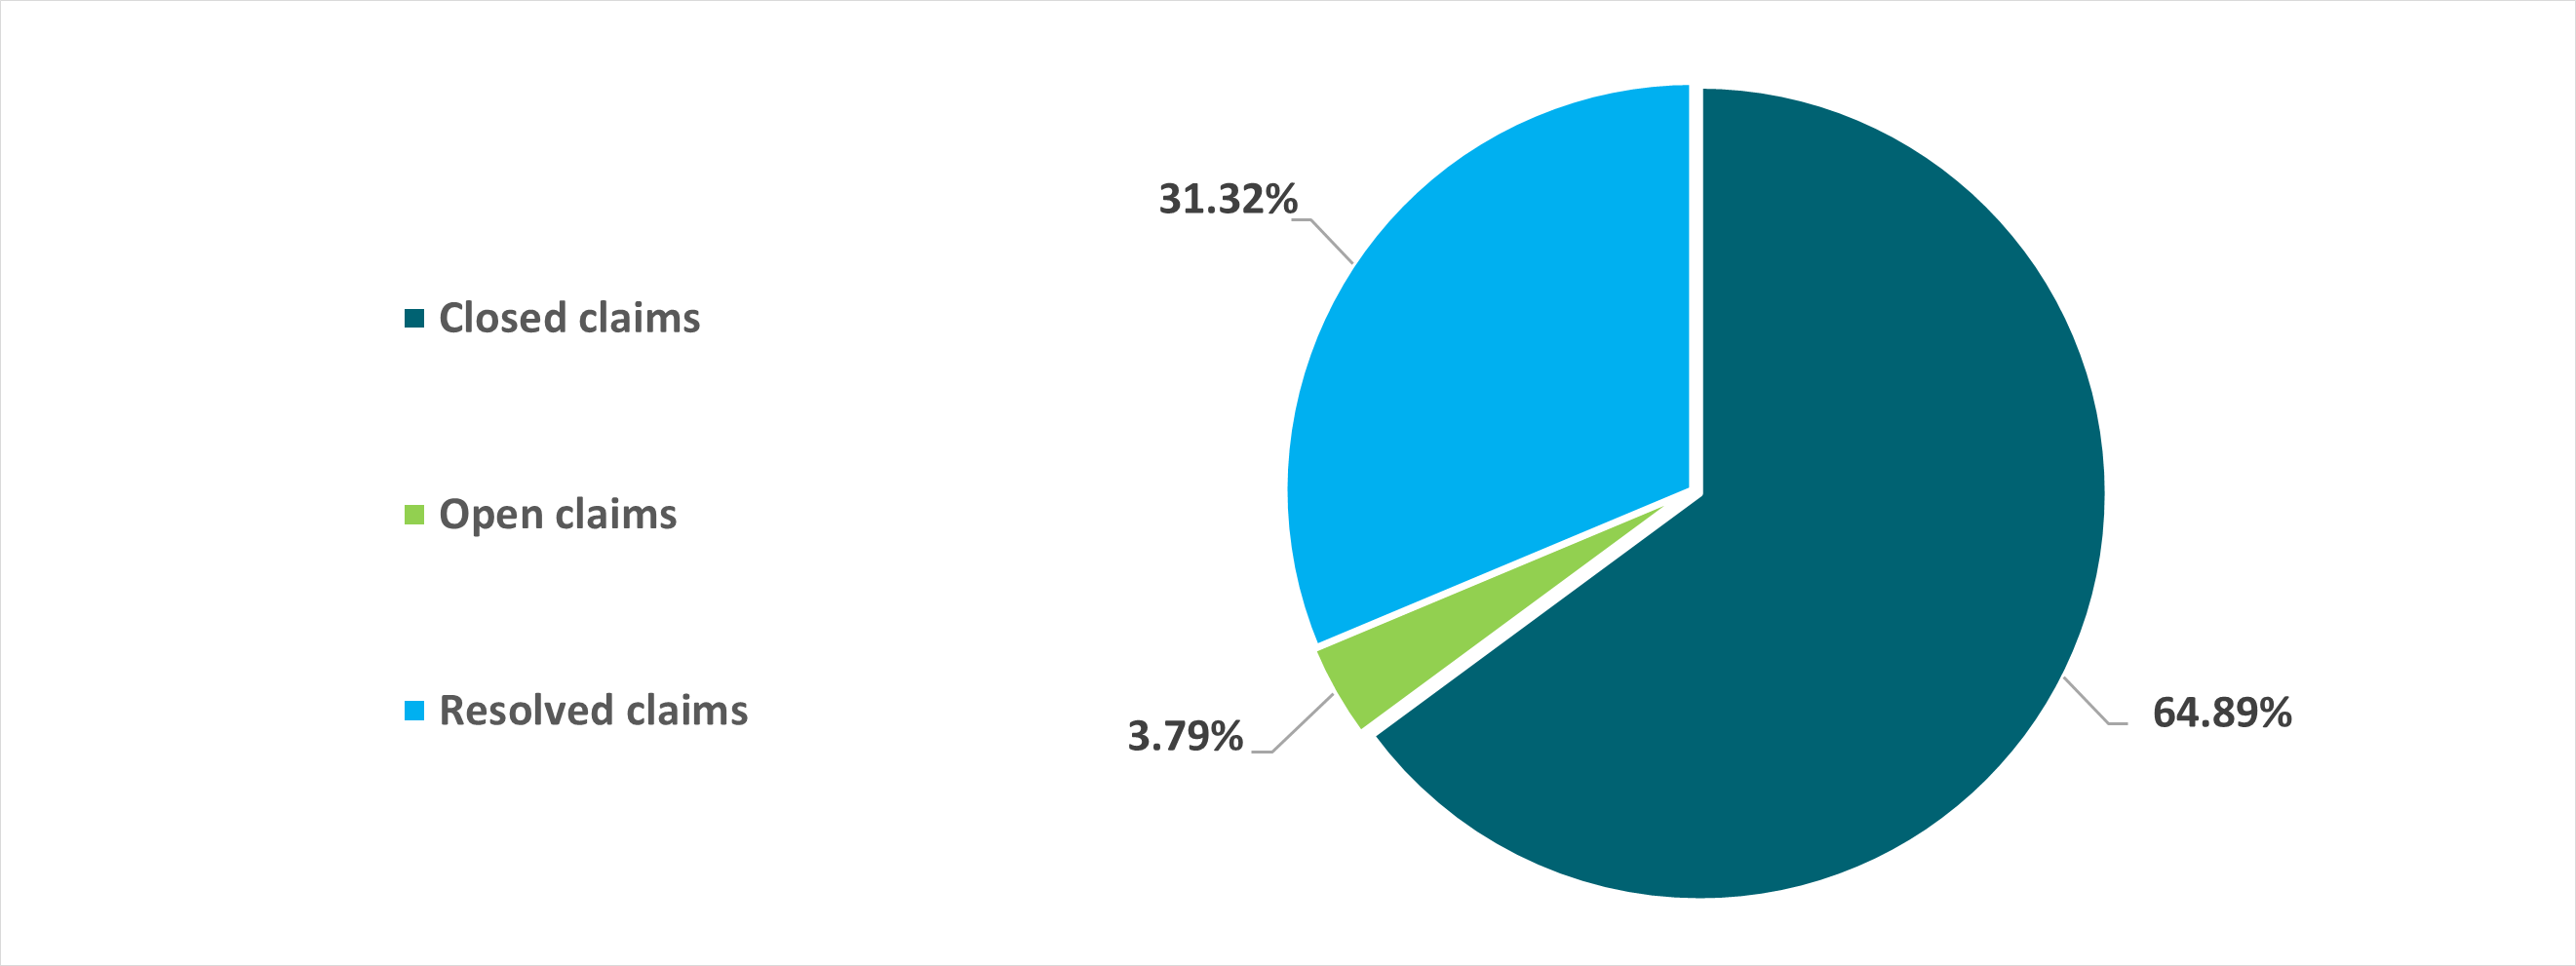 Pie chart displaying the data listed below